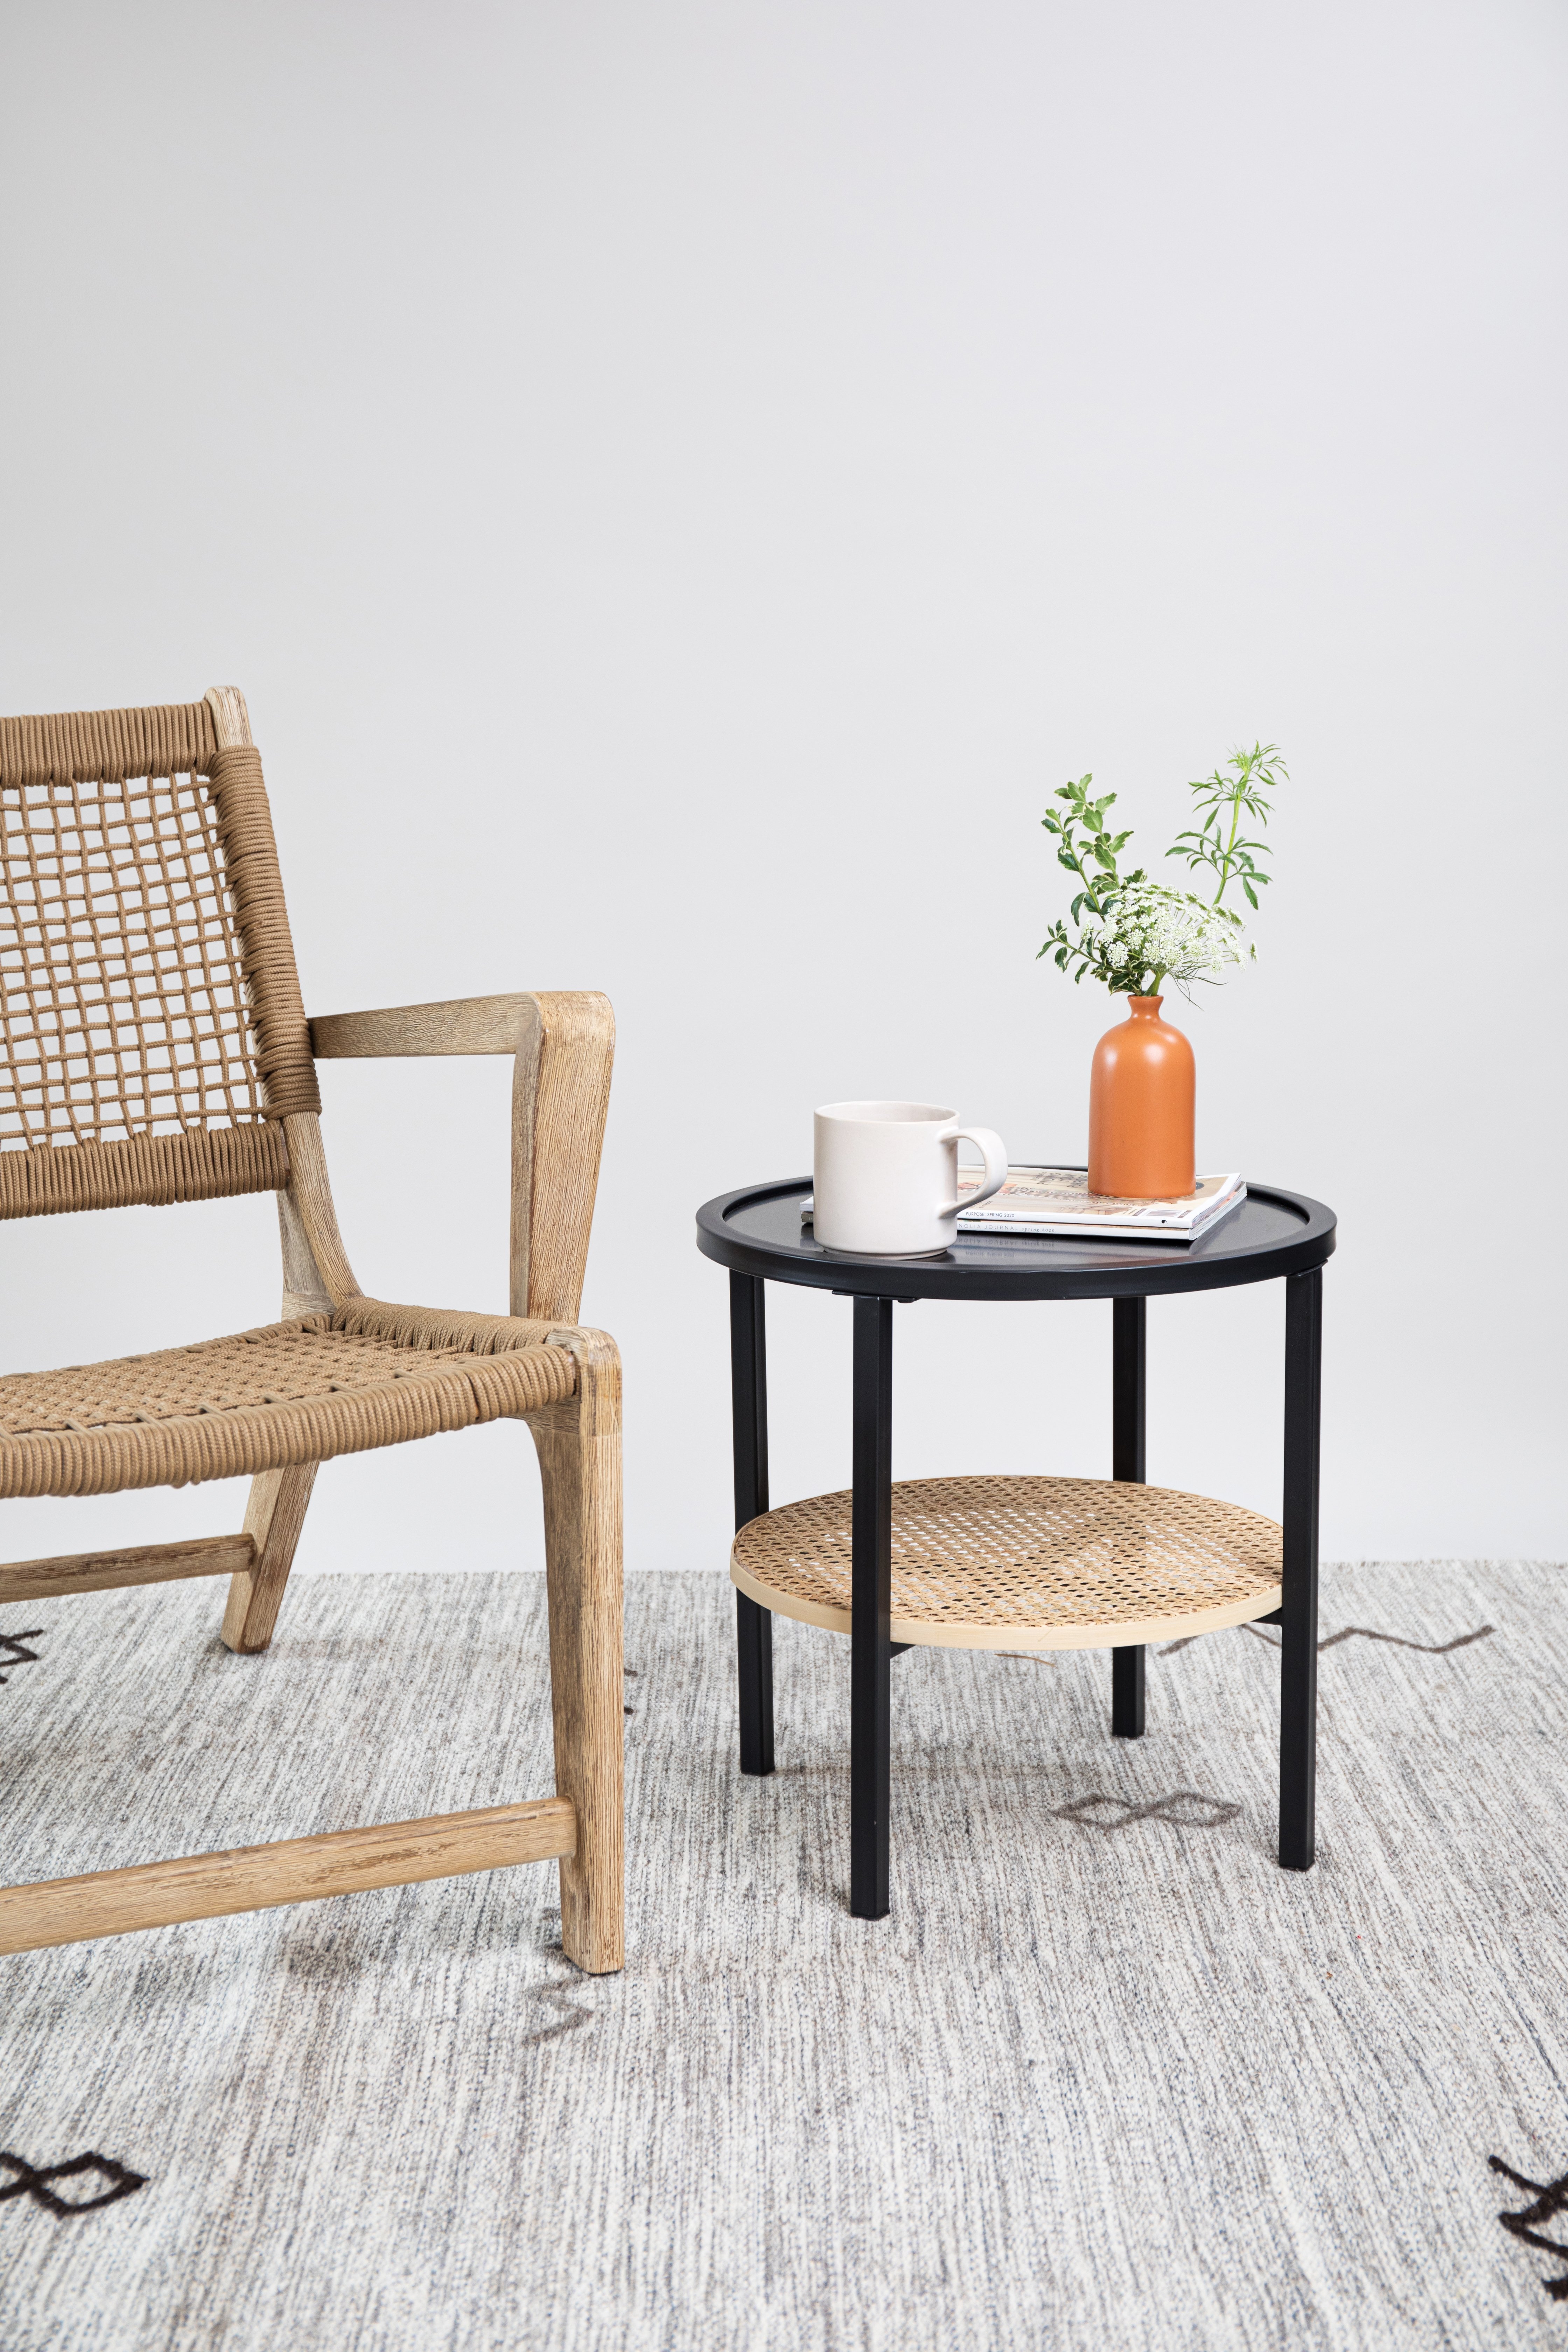 Fairfax Accent Table - Image 1